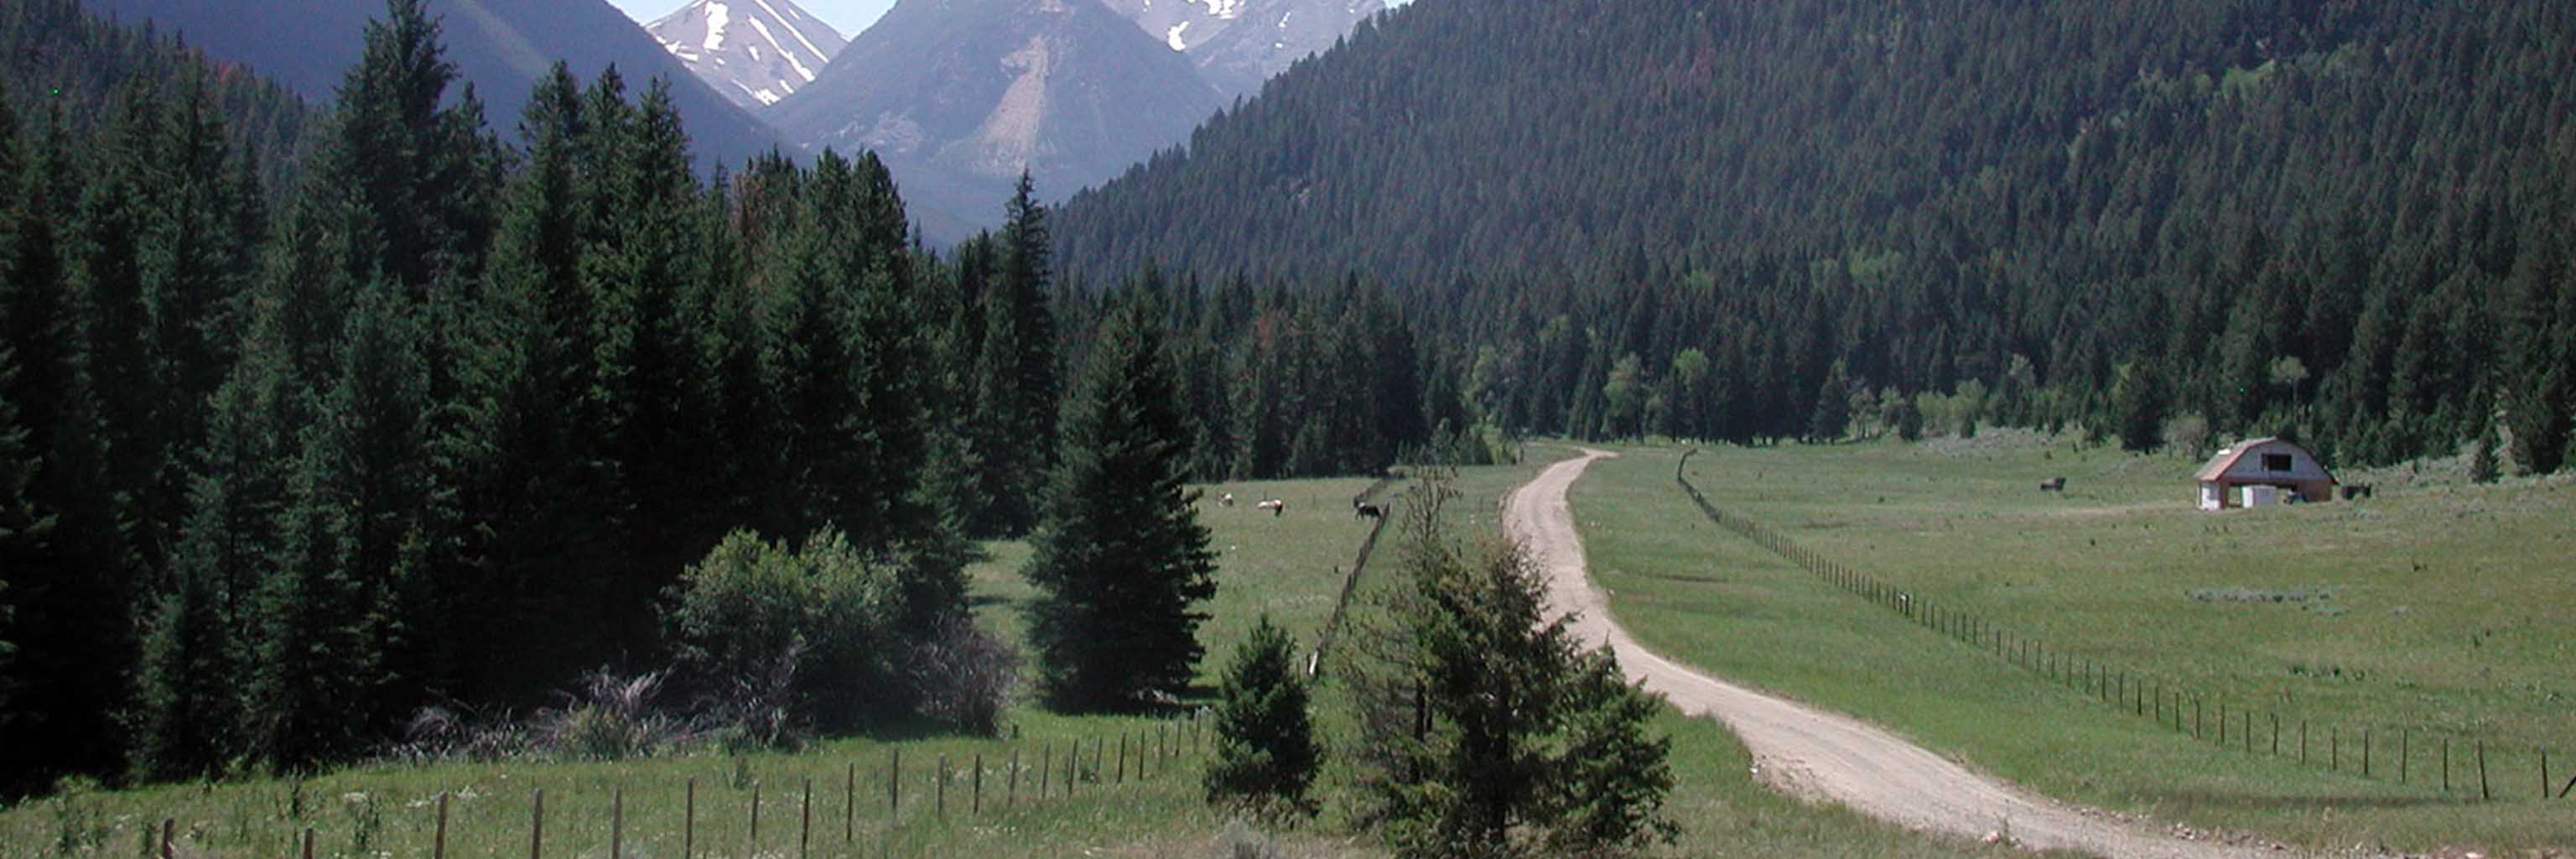 landscape of a forest ridge and rural road